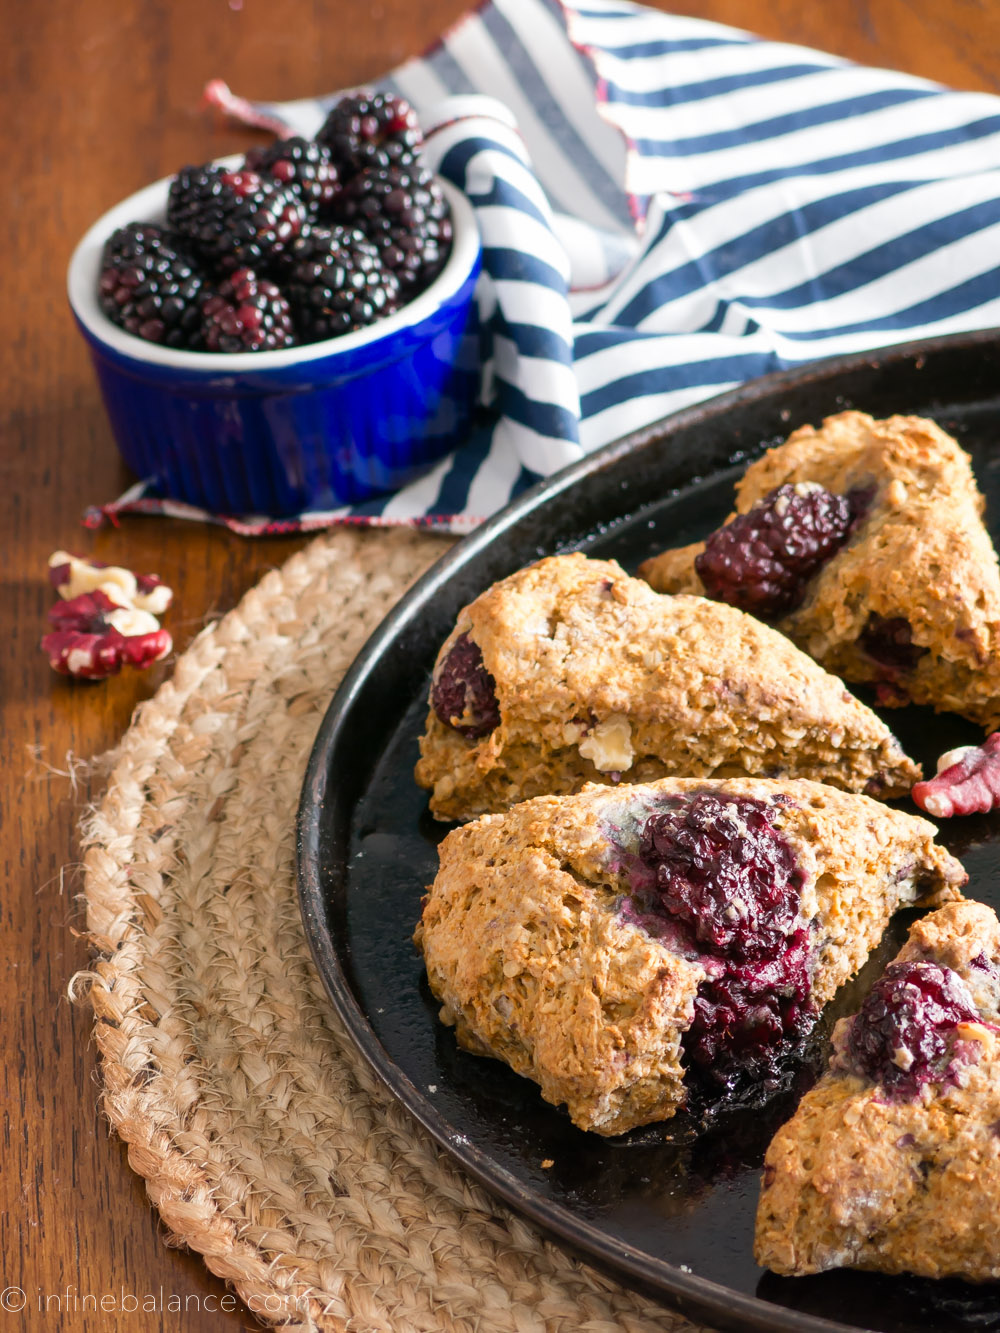 blackberry and walnut scones on a baking tray, blackberries in the background